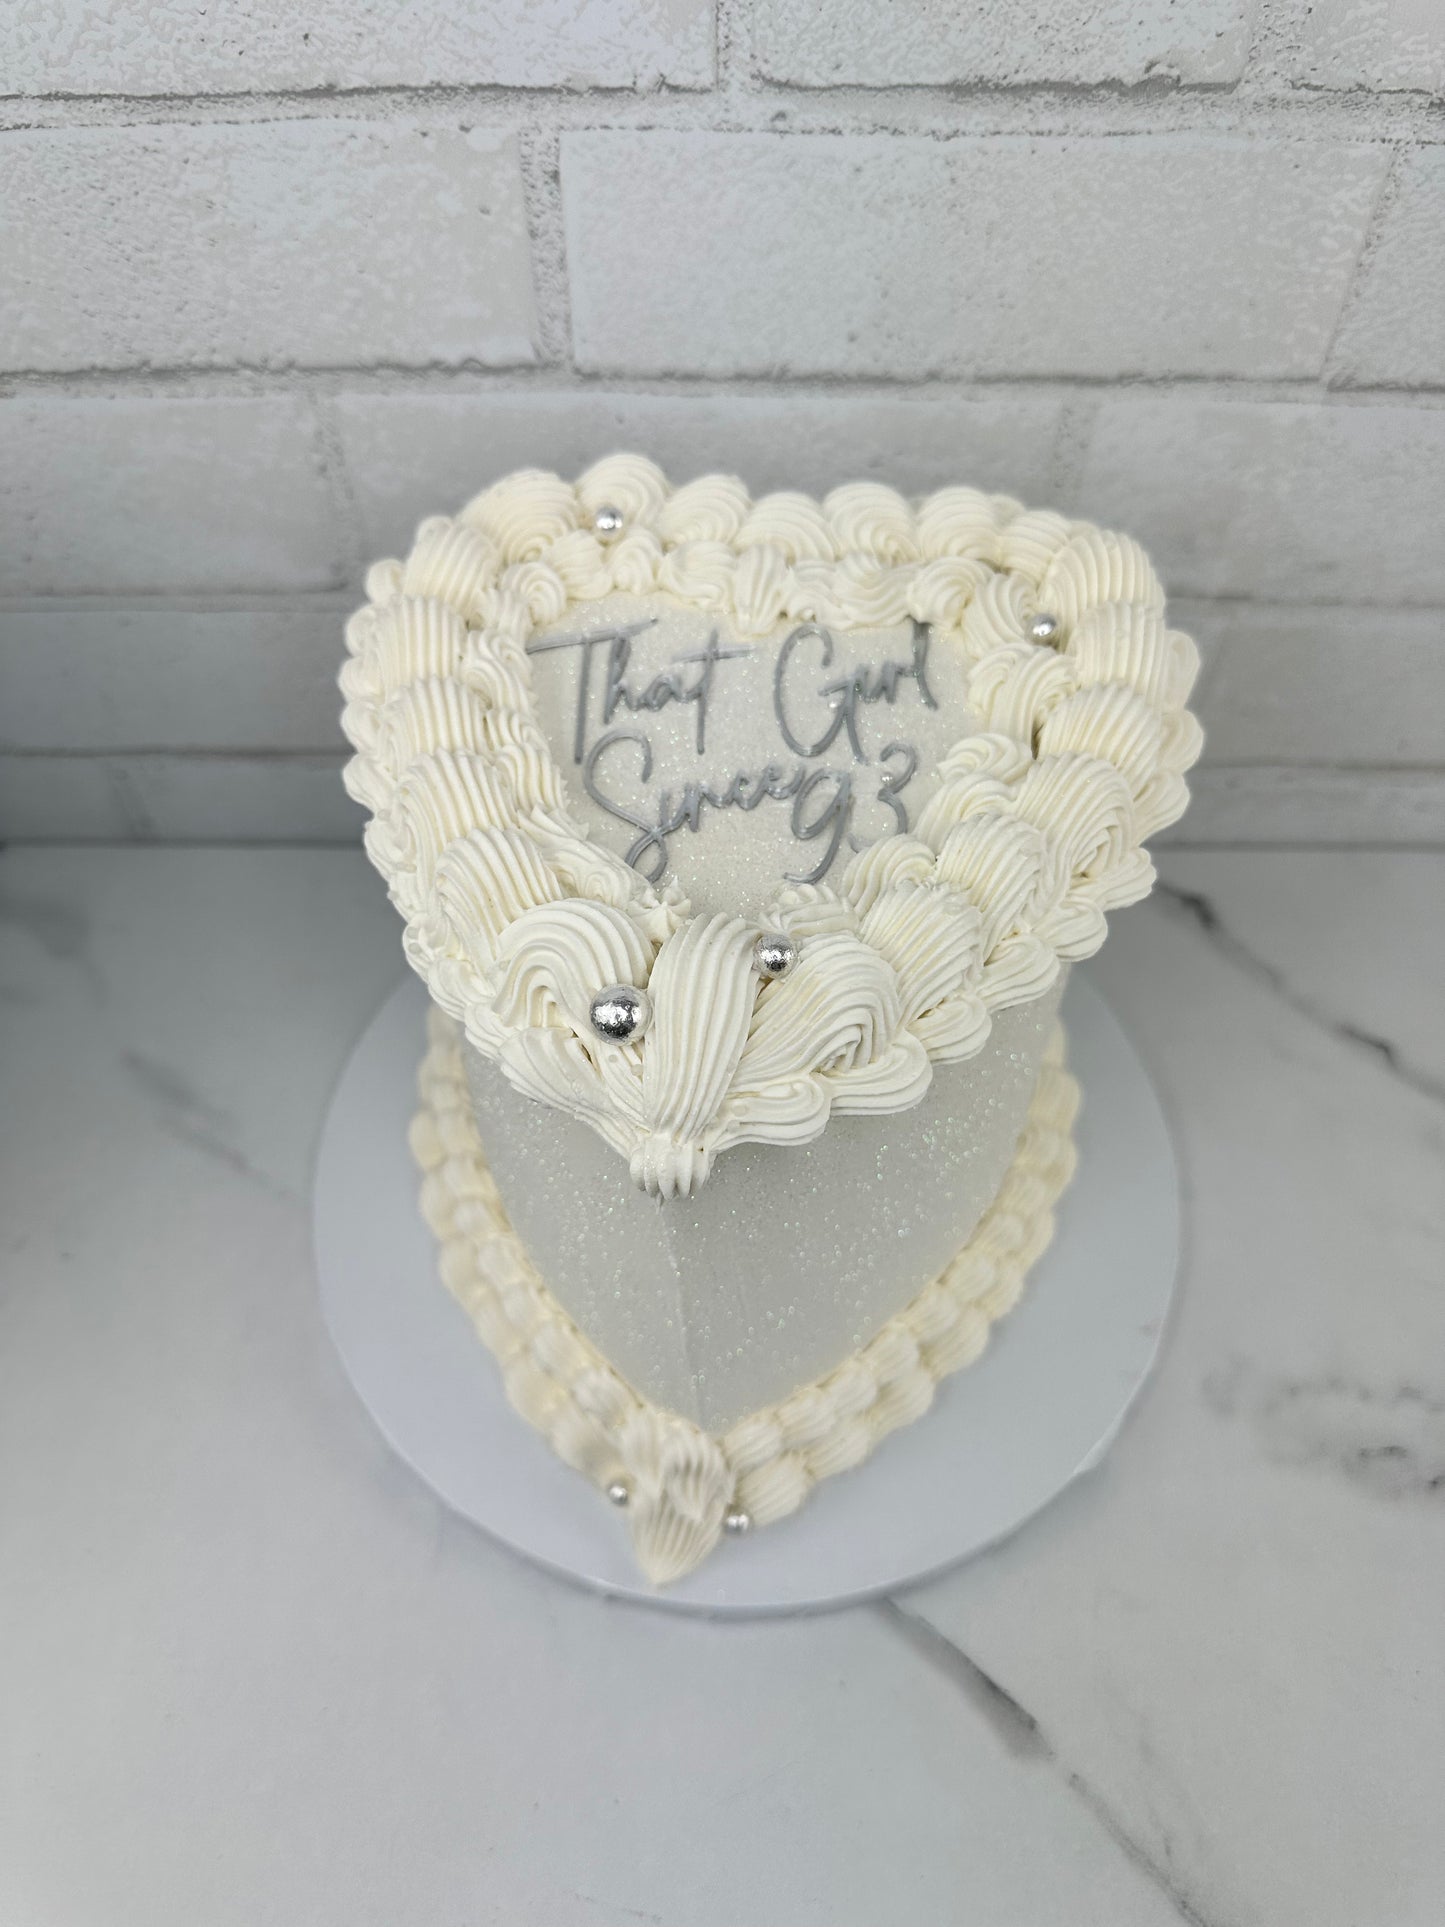 Heart Cake Special’s